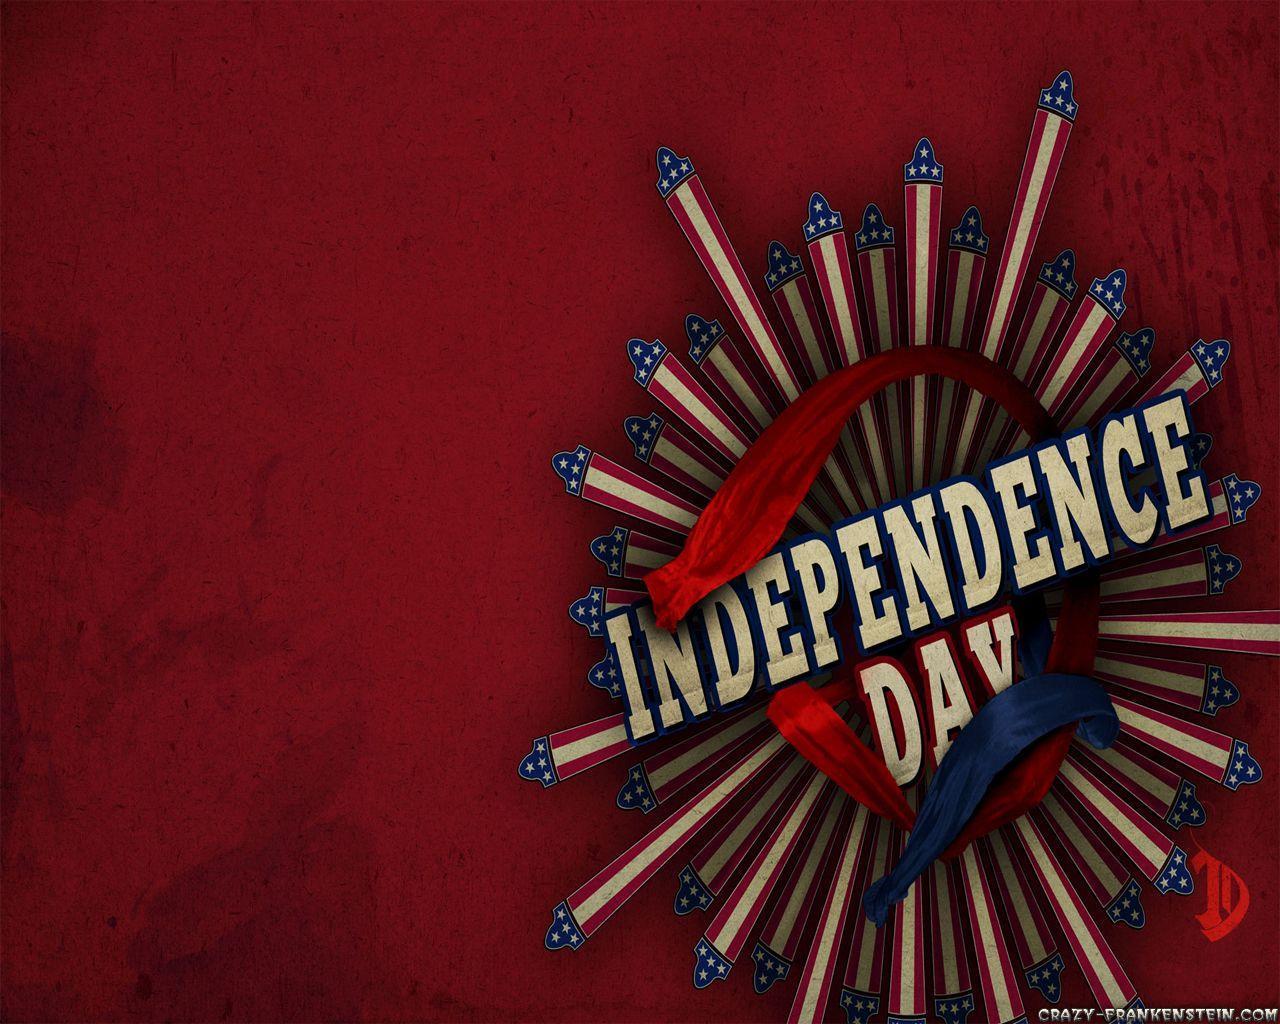 4th of July, Independence Day wallpaper